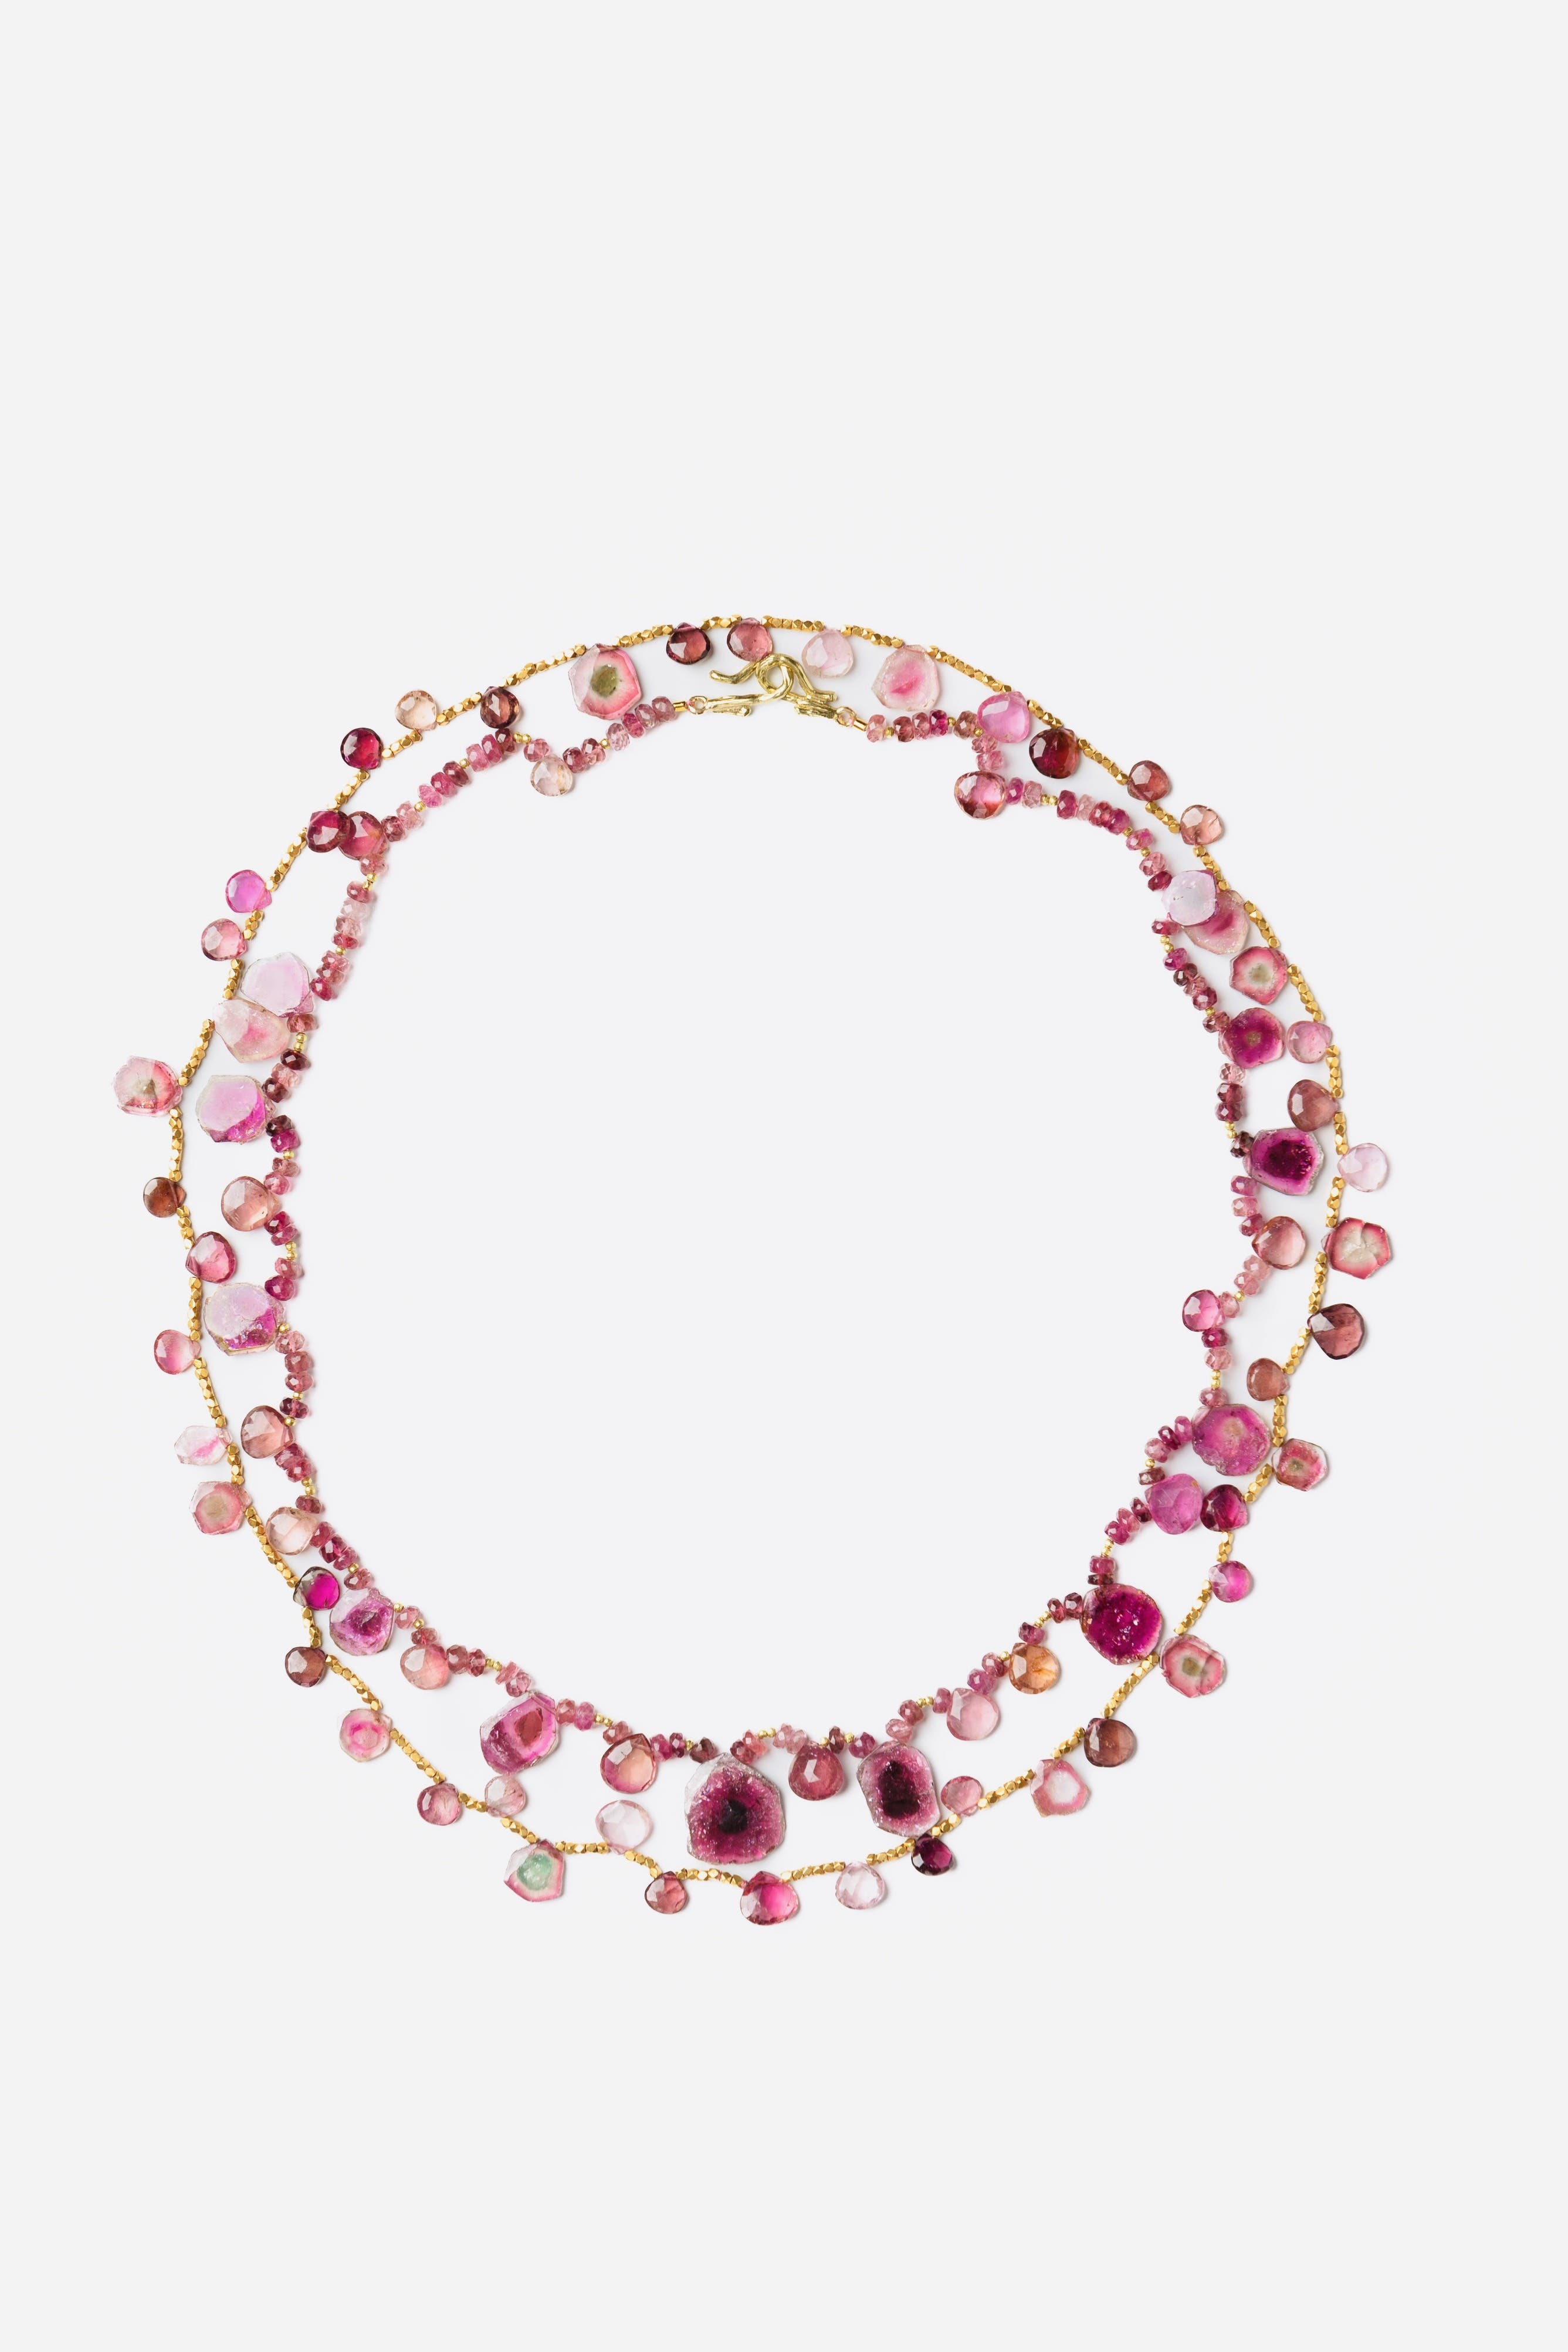 Pink Tourmaline and Gold Necklace & Pink Tourmaline and Gold Necklace with Gold Clasp image